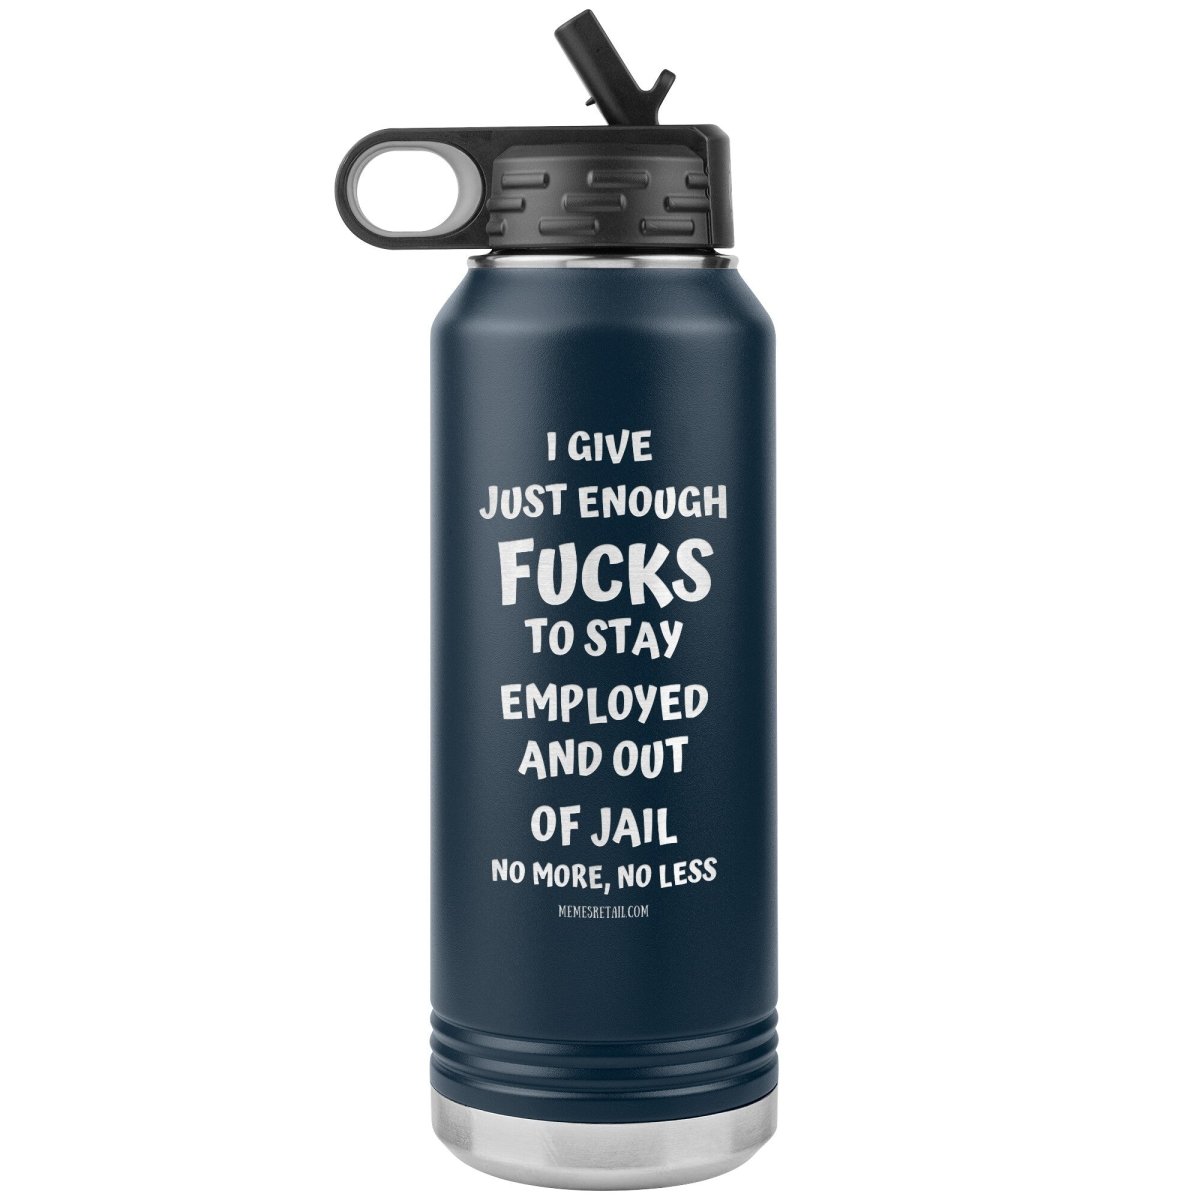 I Give Just Enough Fucks To Stay Employed And Out Of Jail, No More, No Less 32 Oz Water Bottle Tumbler, Navy - MemesRetail.com